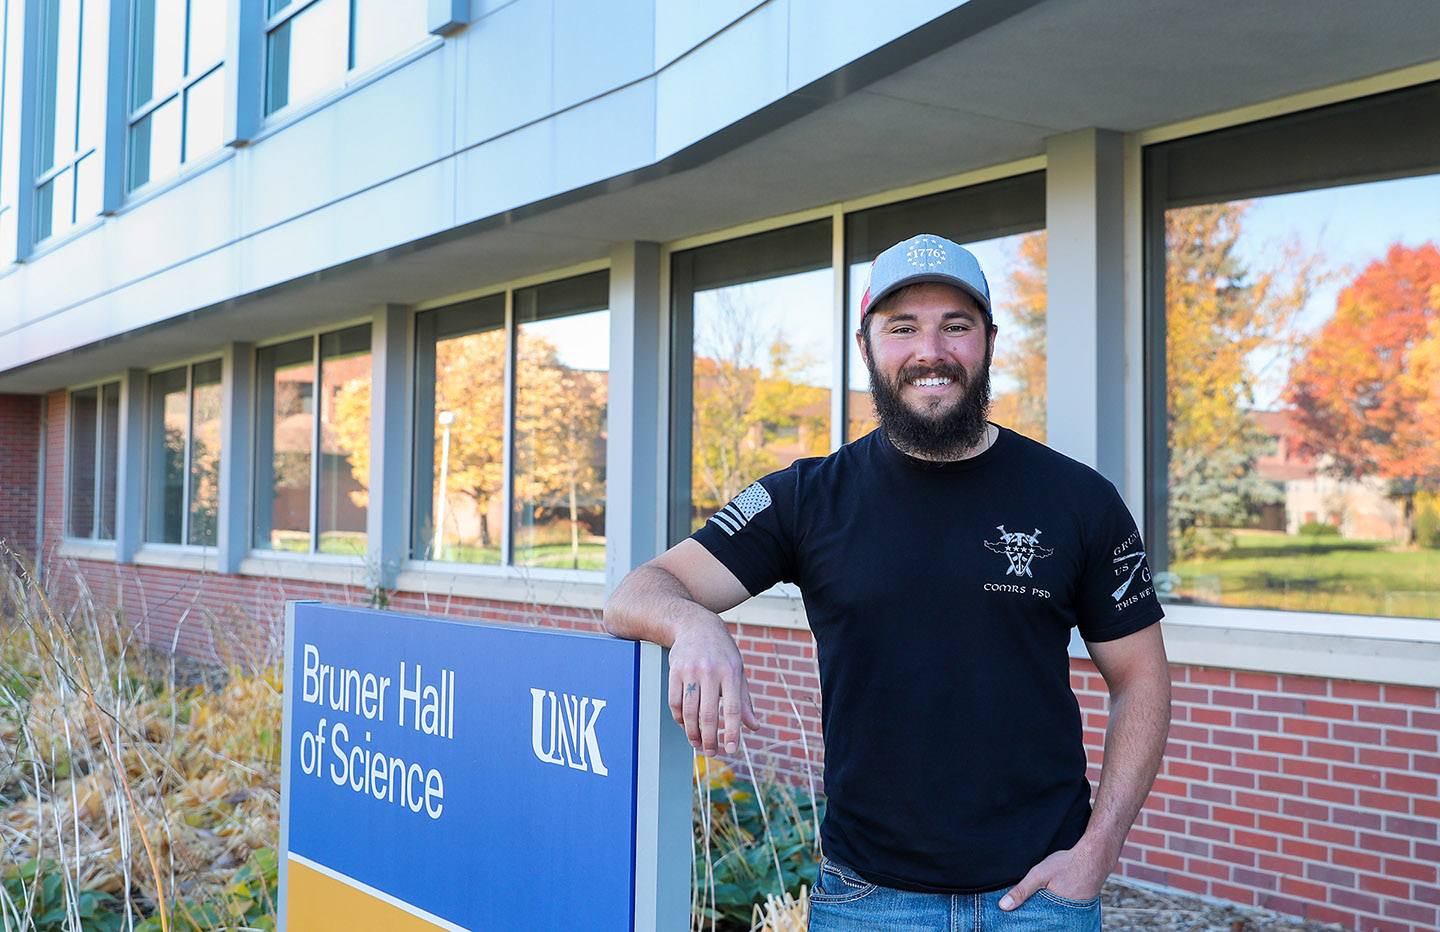 Josh Blaesi is a senior biology major in UNK’s pre-veterinary medicine program. He returned to college in fall 2018 after completing three deployments as a military police officer in the U.S. Army Reserve. (Photo by Erika Pritchard, UNK Communications)